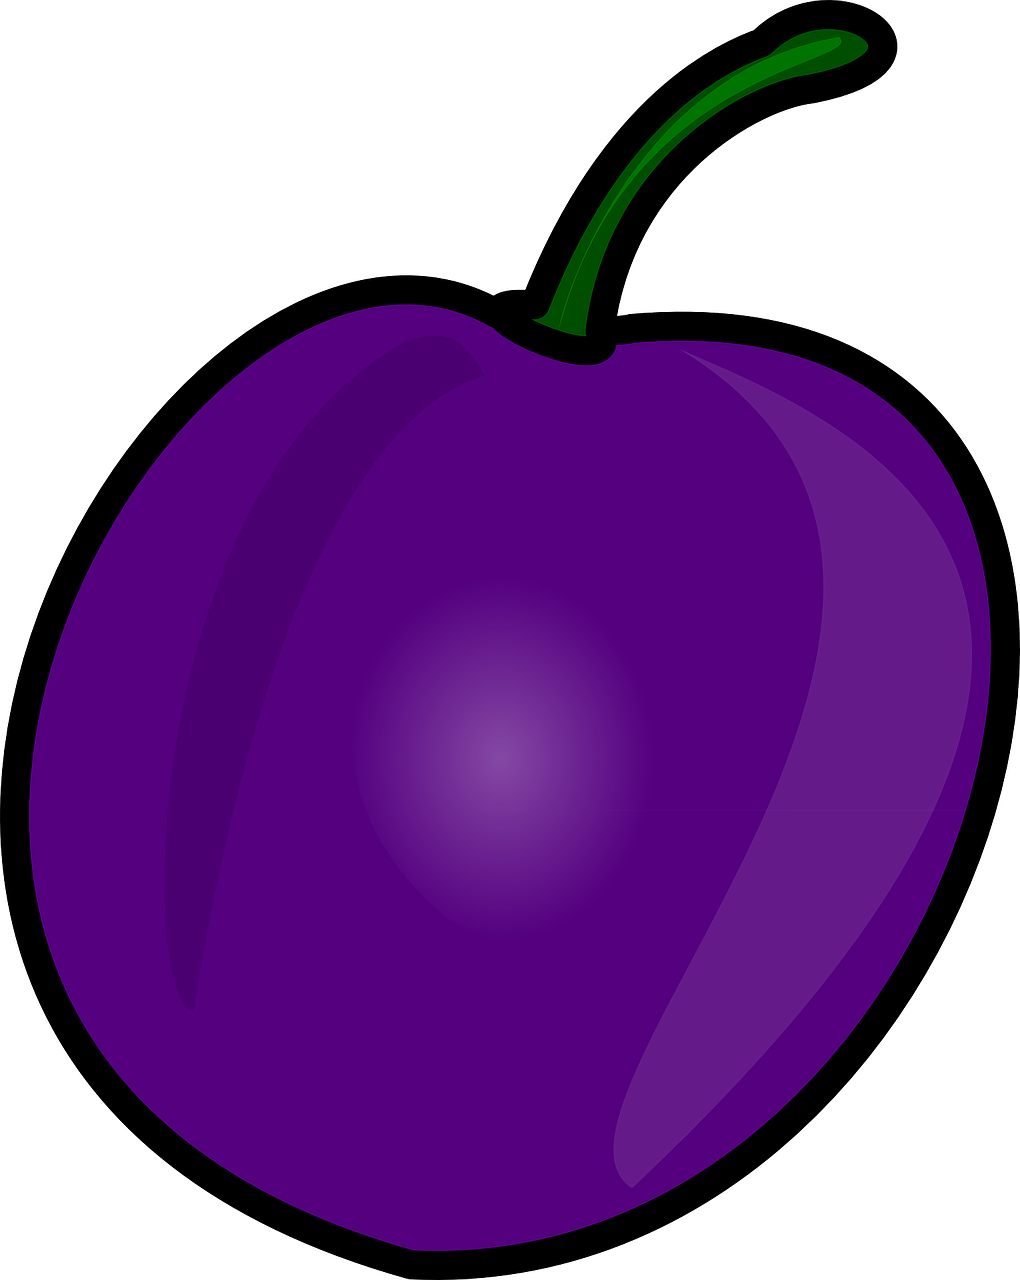 a purple plum on a black background, a digital rendering, by Tom Carapic, pixabay, sōsaku hanga, !!! very coherent!!! vector art, pepper, there is one cherry, second colours - purple